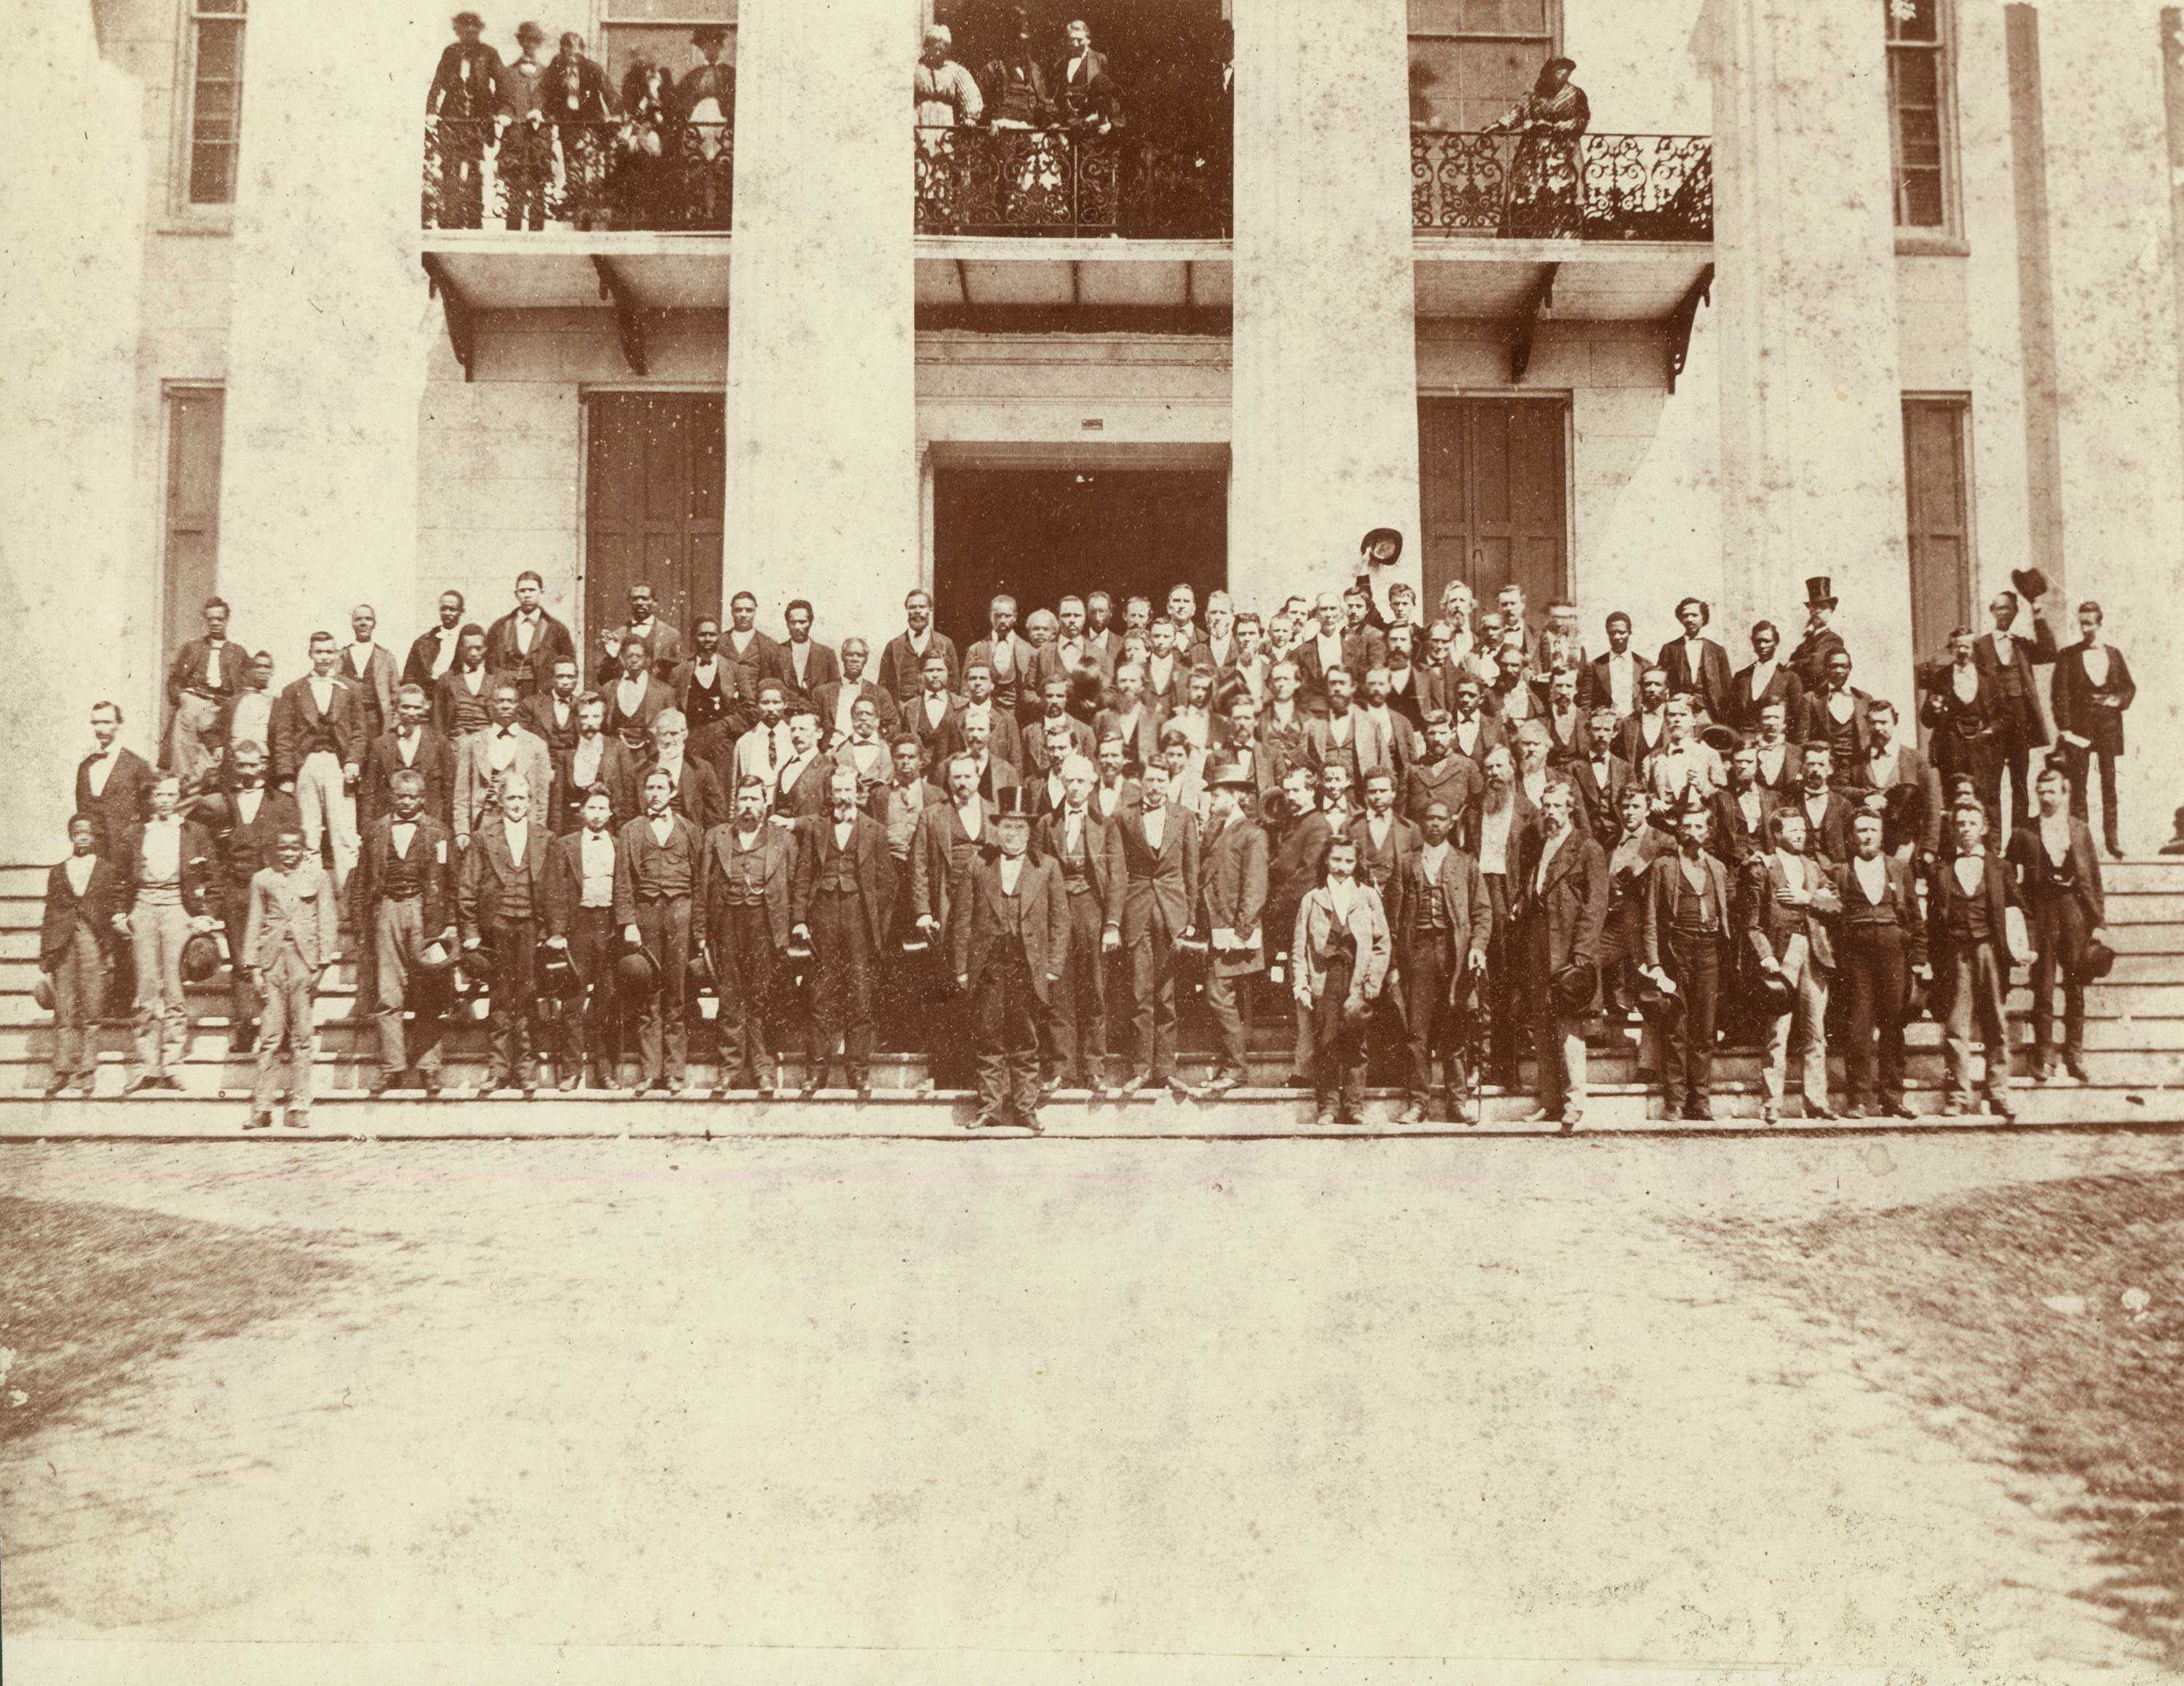 A sepia toned photograph of a large crowd of representatives stand in front of the Alabama's state capitol.